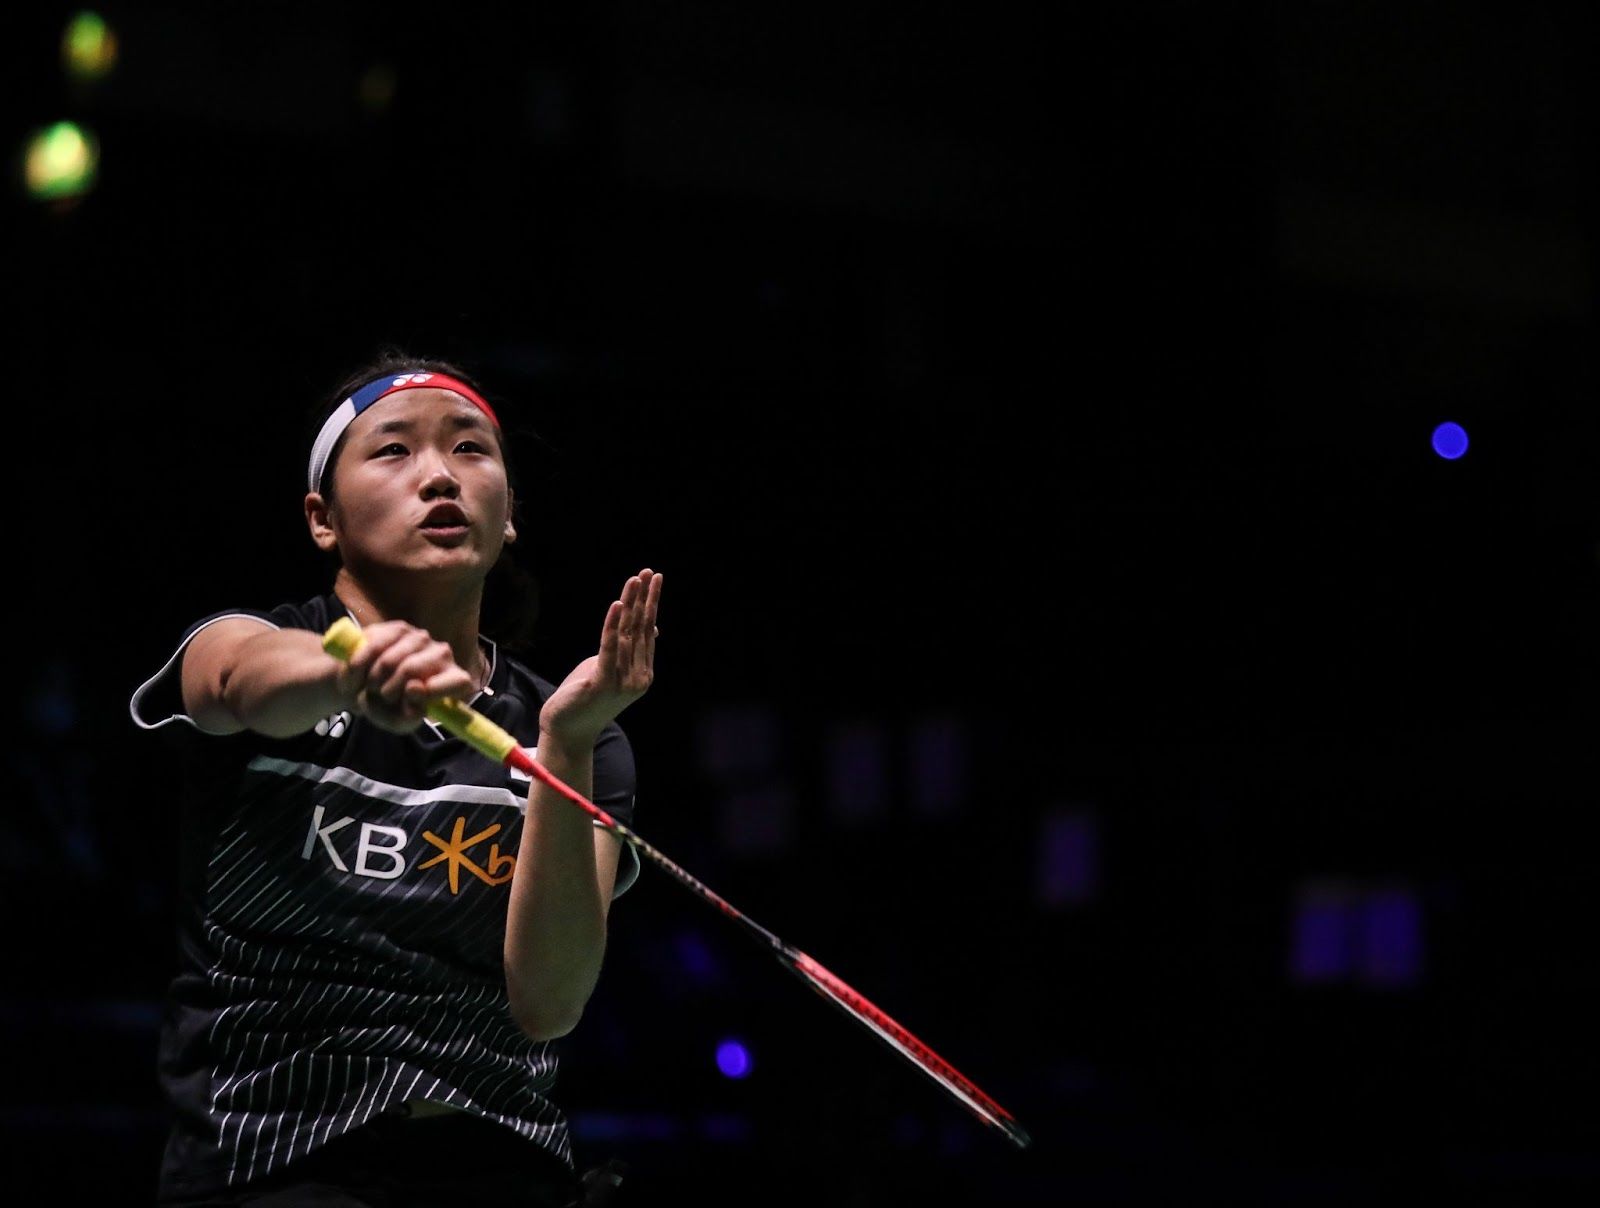 Badminton: An Seyoung claims the World Tours title